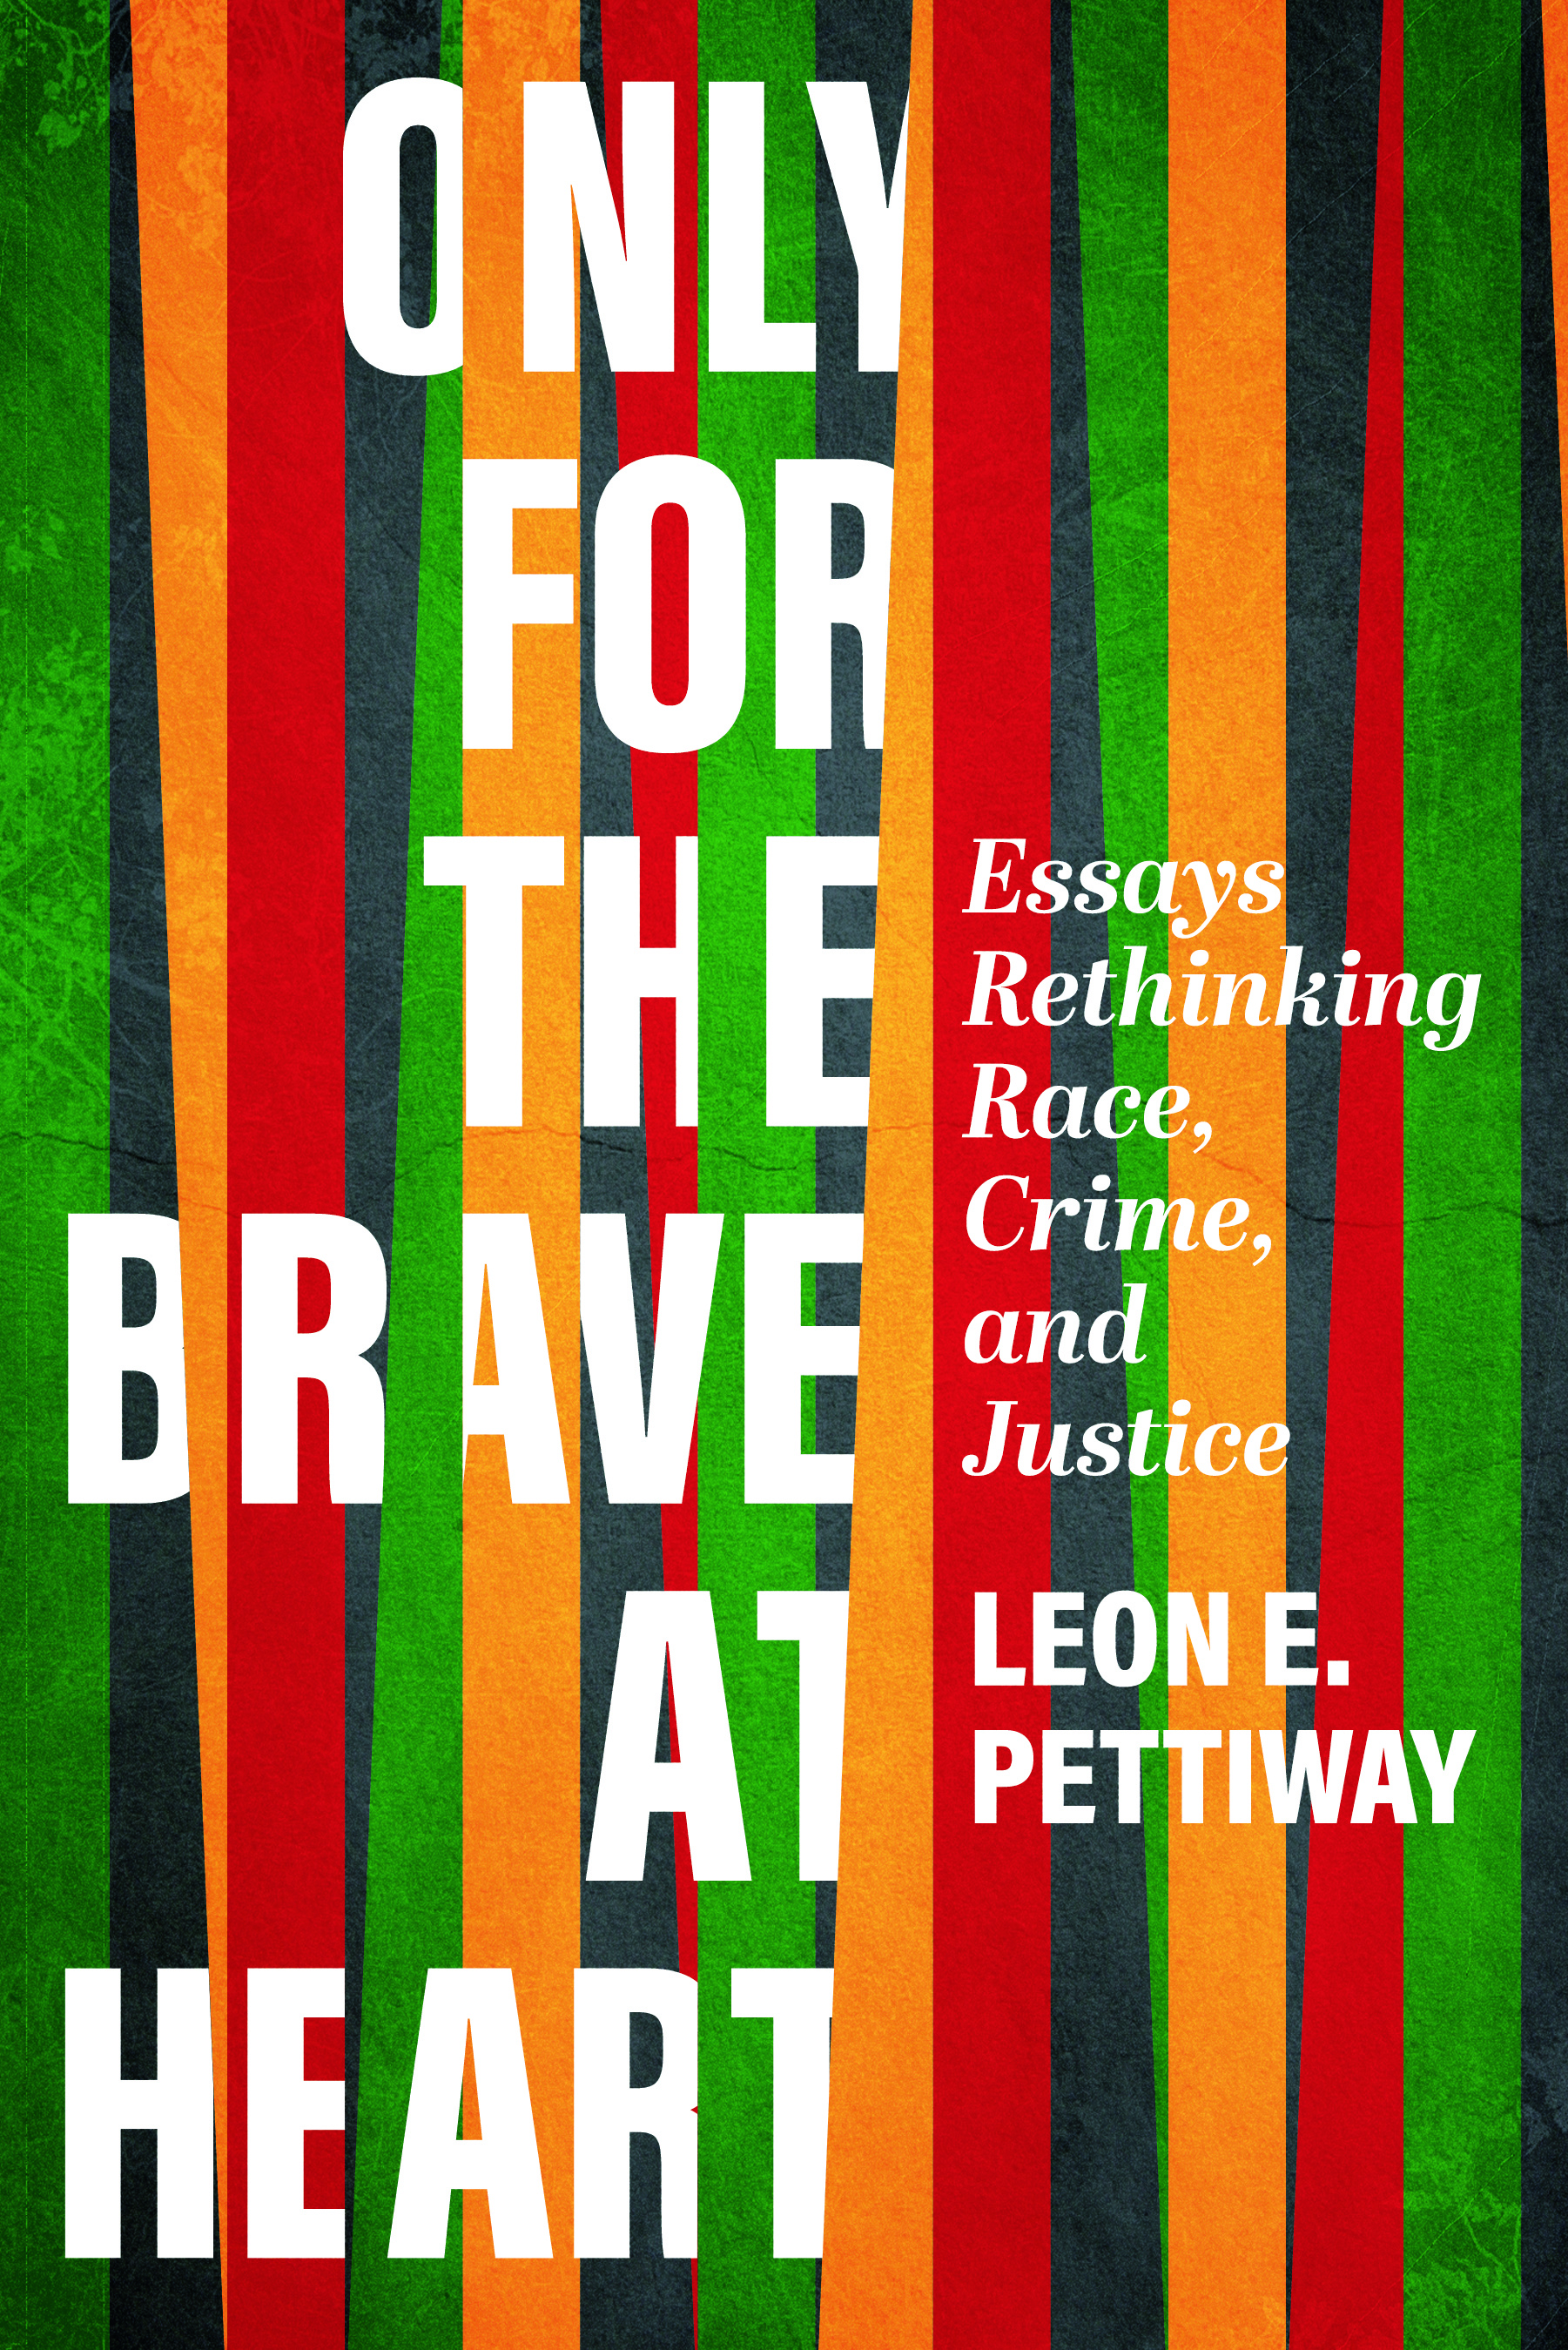 Book cover image of Only for the Brave at Heart: Essays Rethinking Race, Crime, and Justice by Leon E. Pettiway